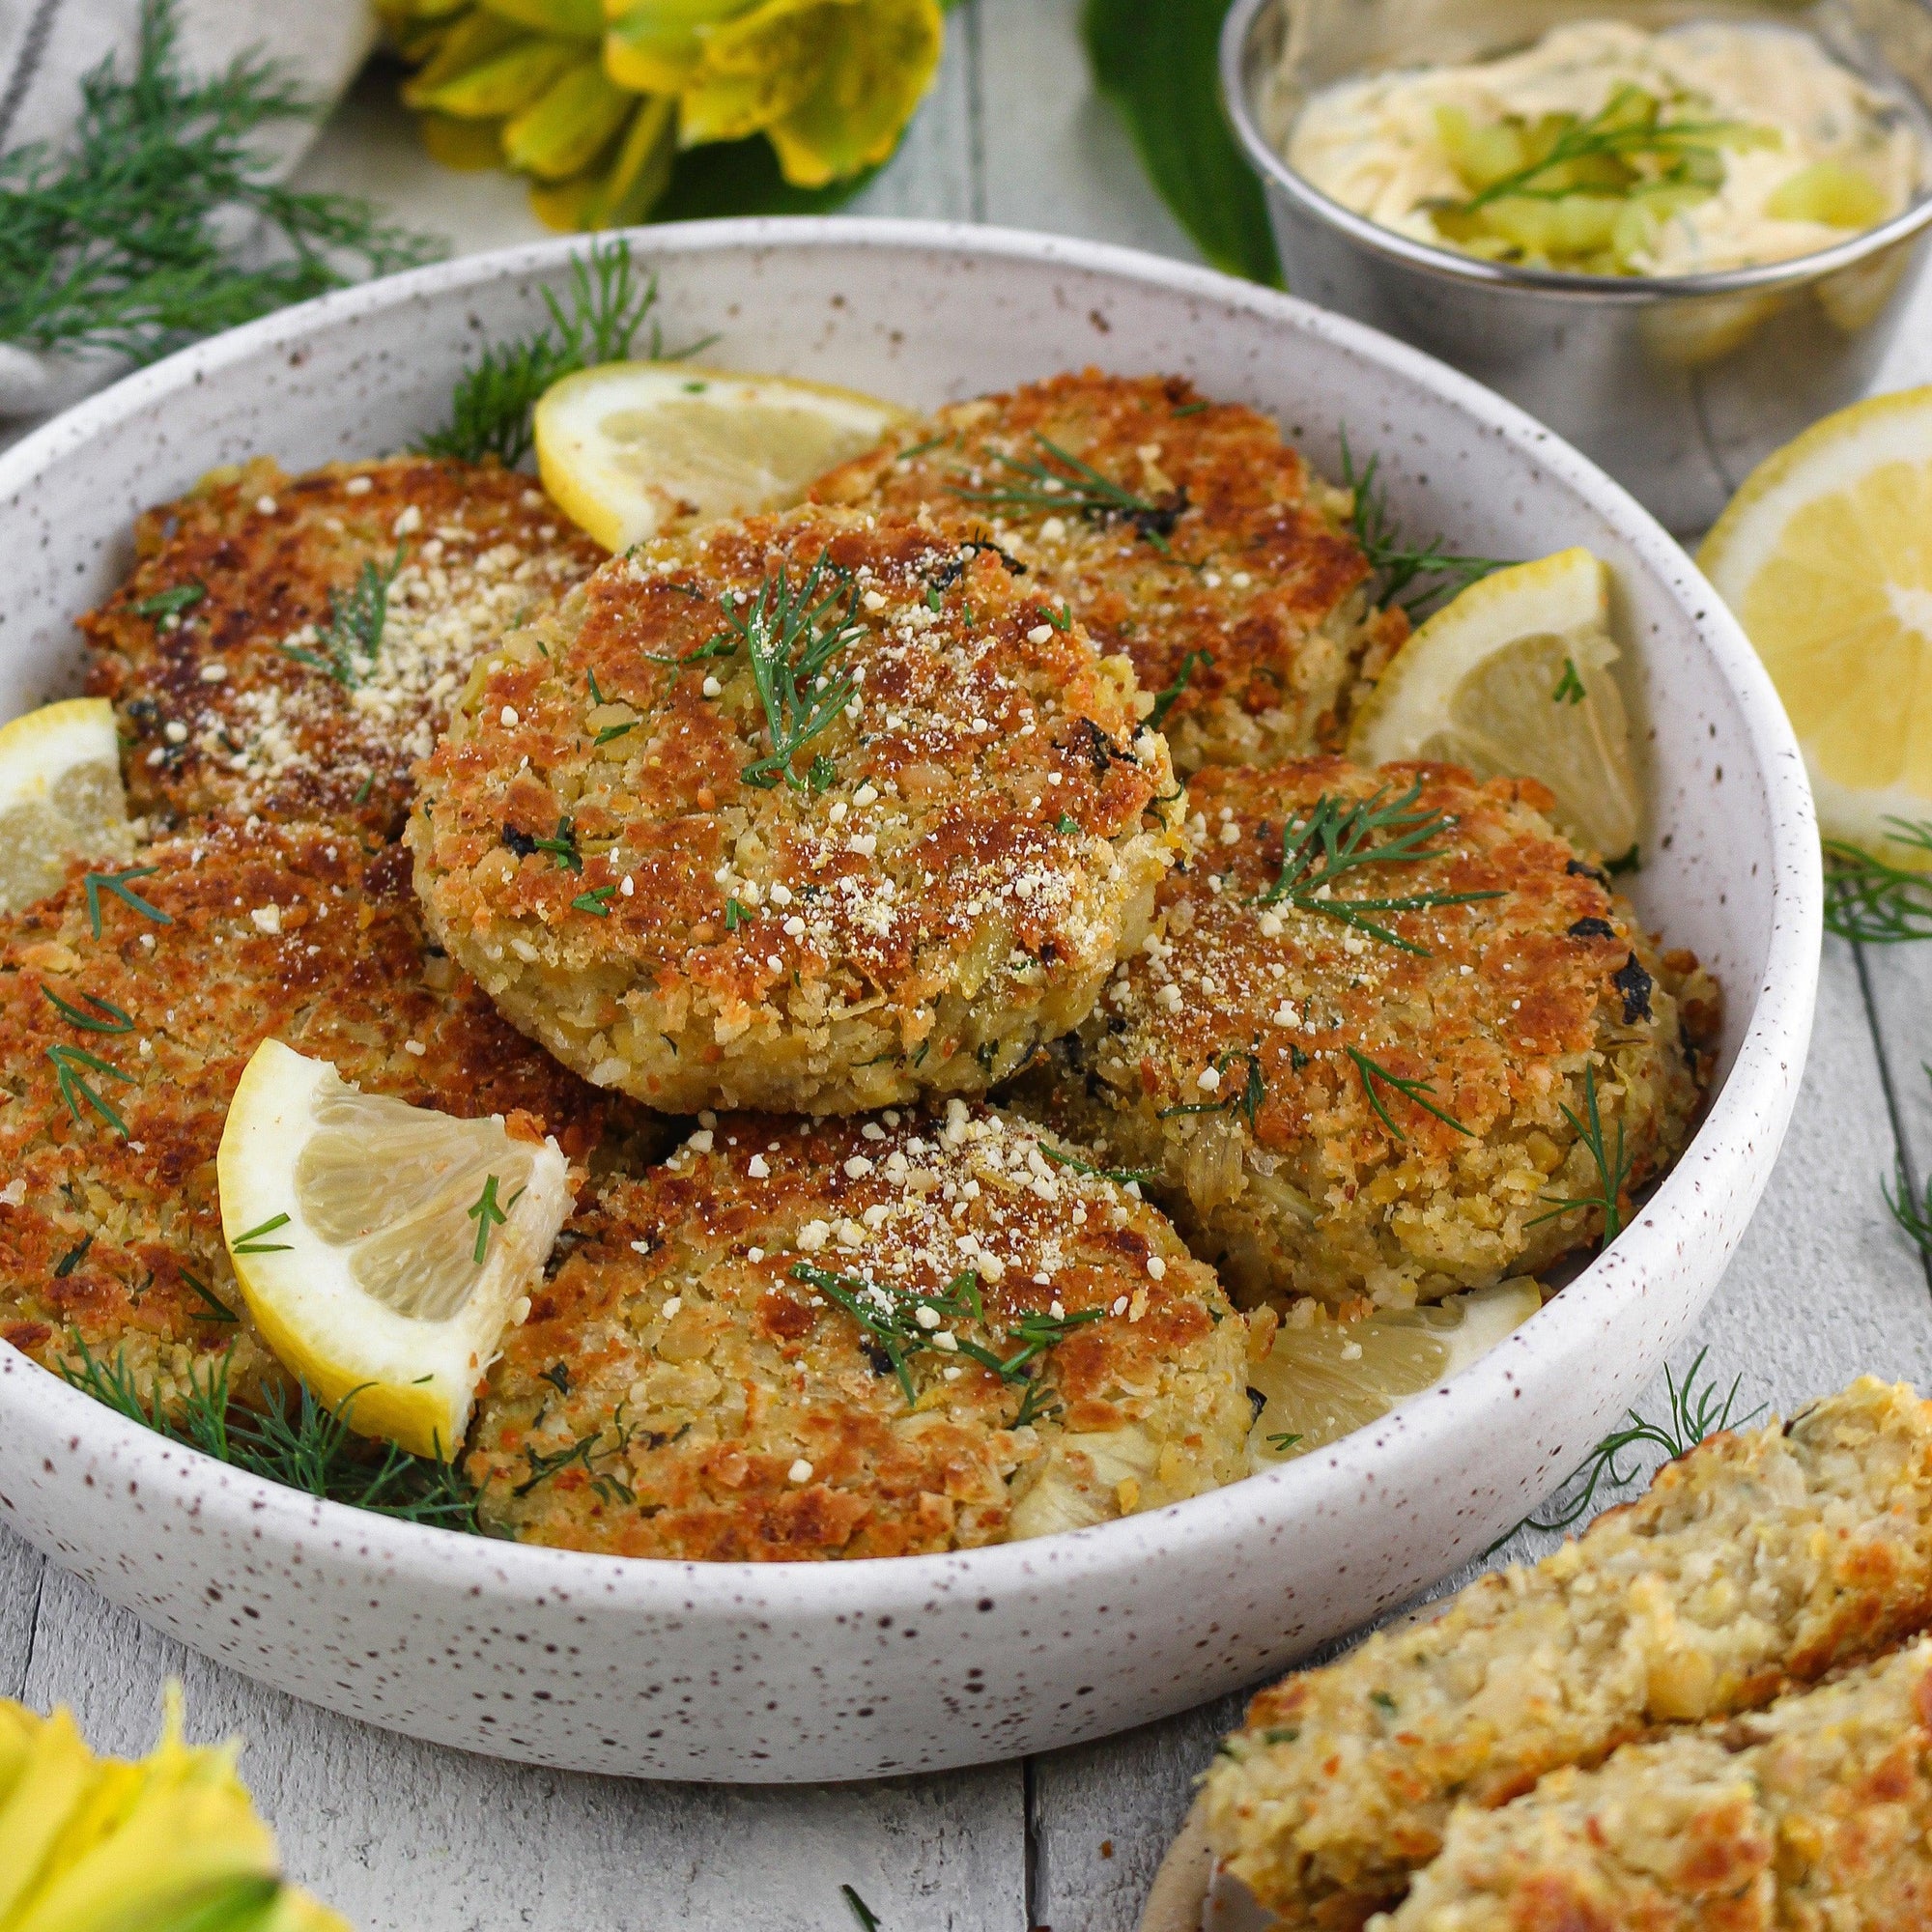 Fremont Fish Market Oven Ready Crab Cakes | ALDI REVIEWER